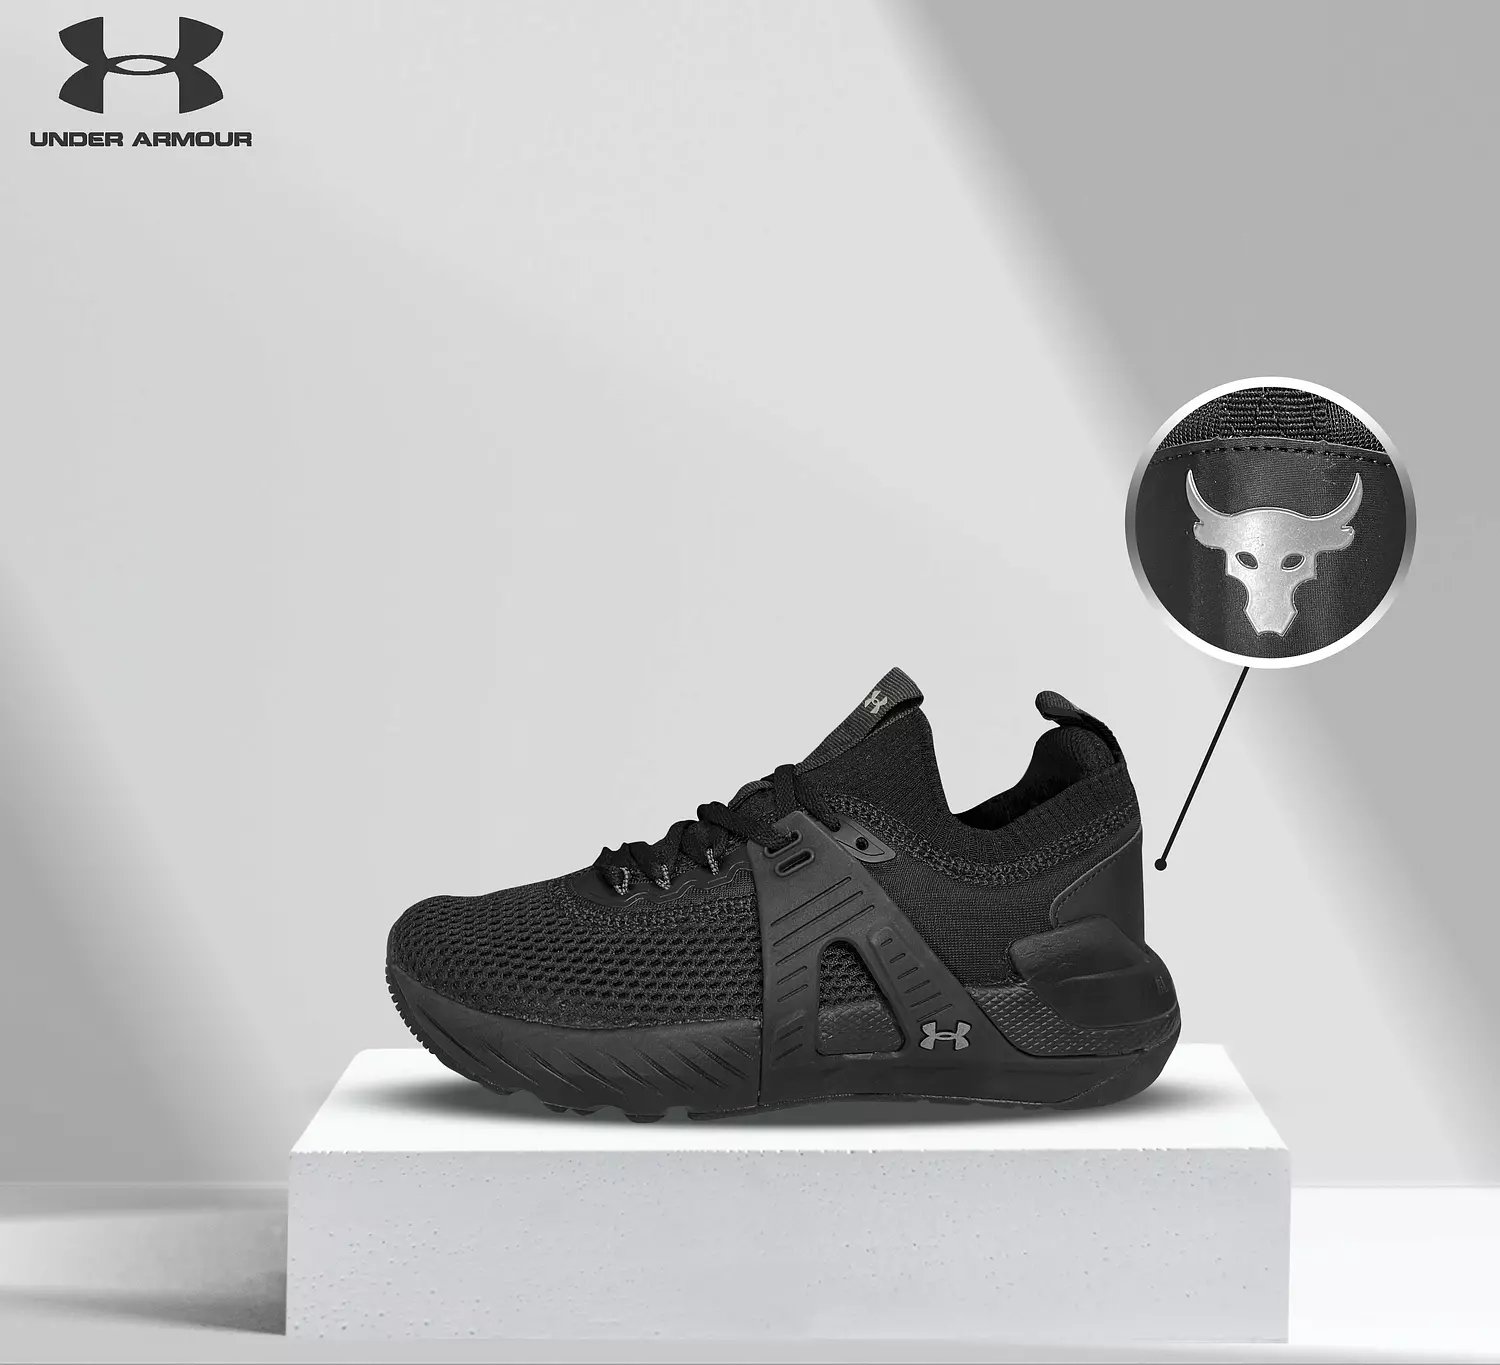 UNDER ARMOUR RUNNING SHOES 1